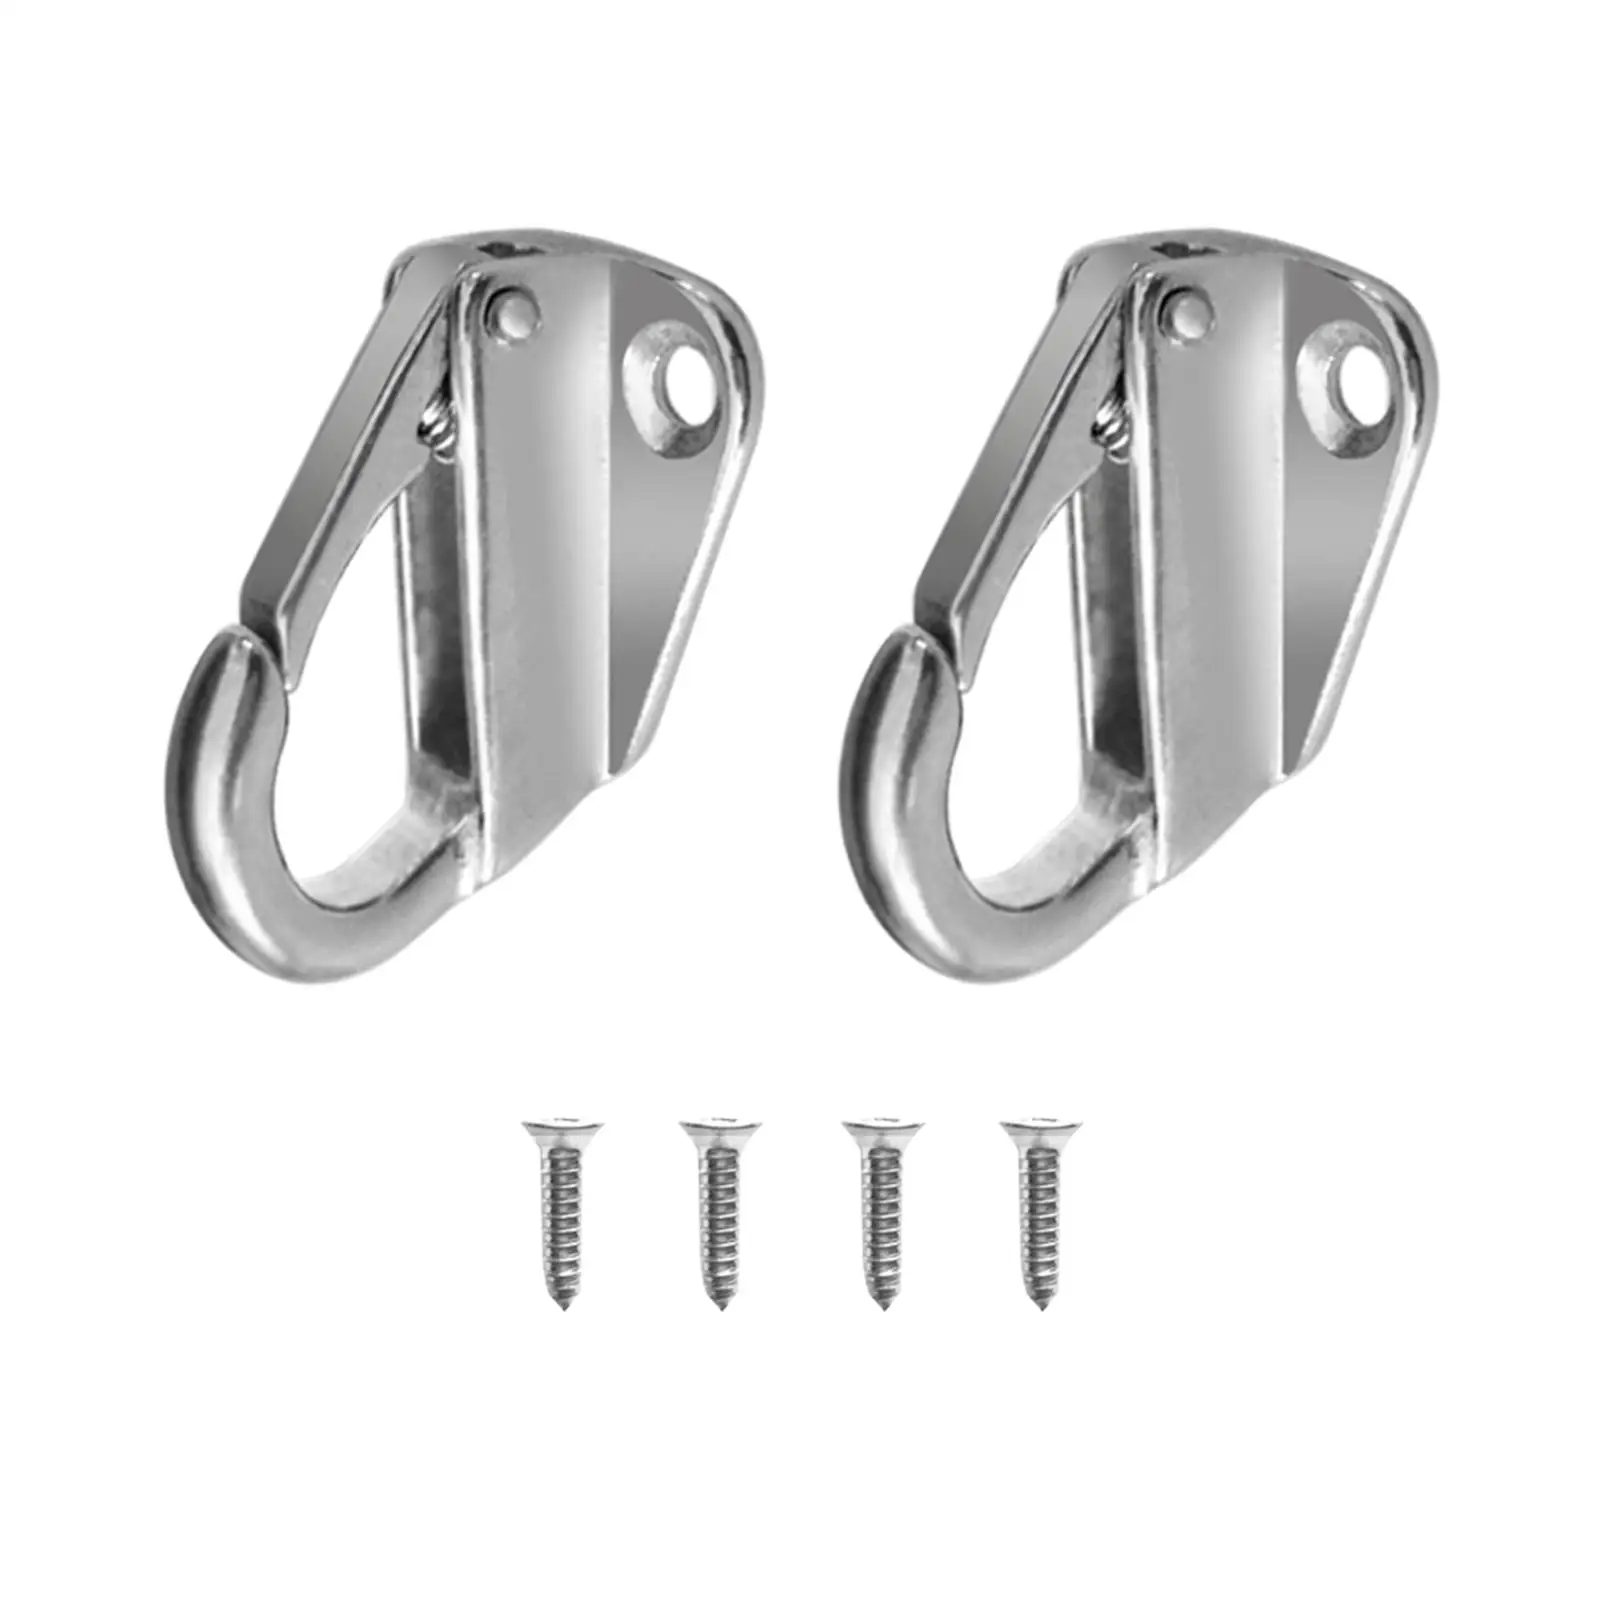 2pcs Marine Grade 316 Stainless Snap Hook Carabiner  Buckle with Screws 12mm Opening